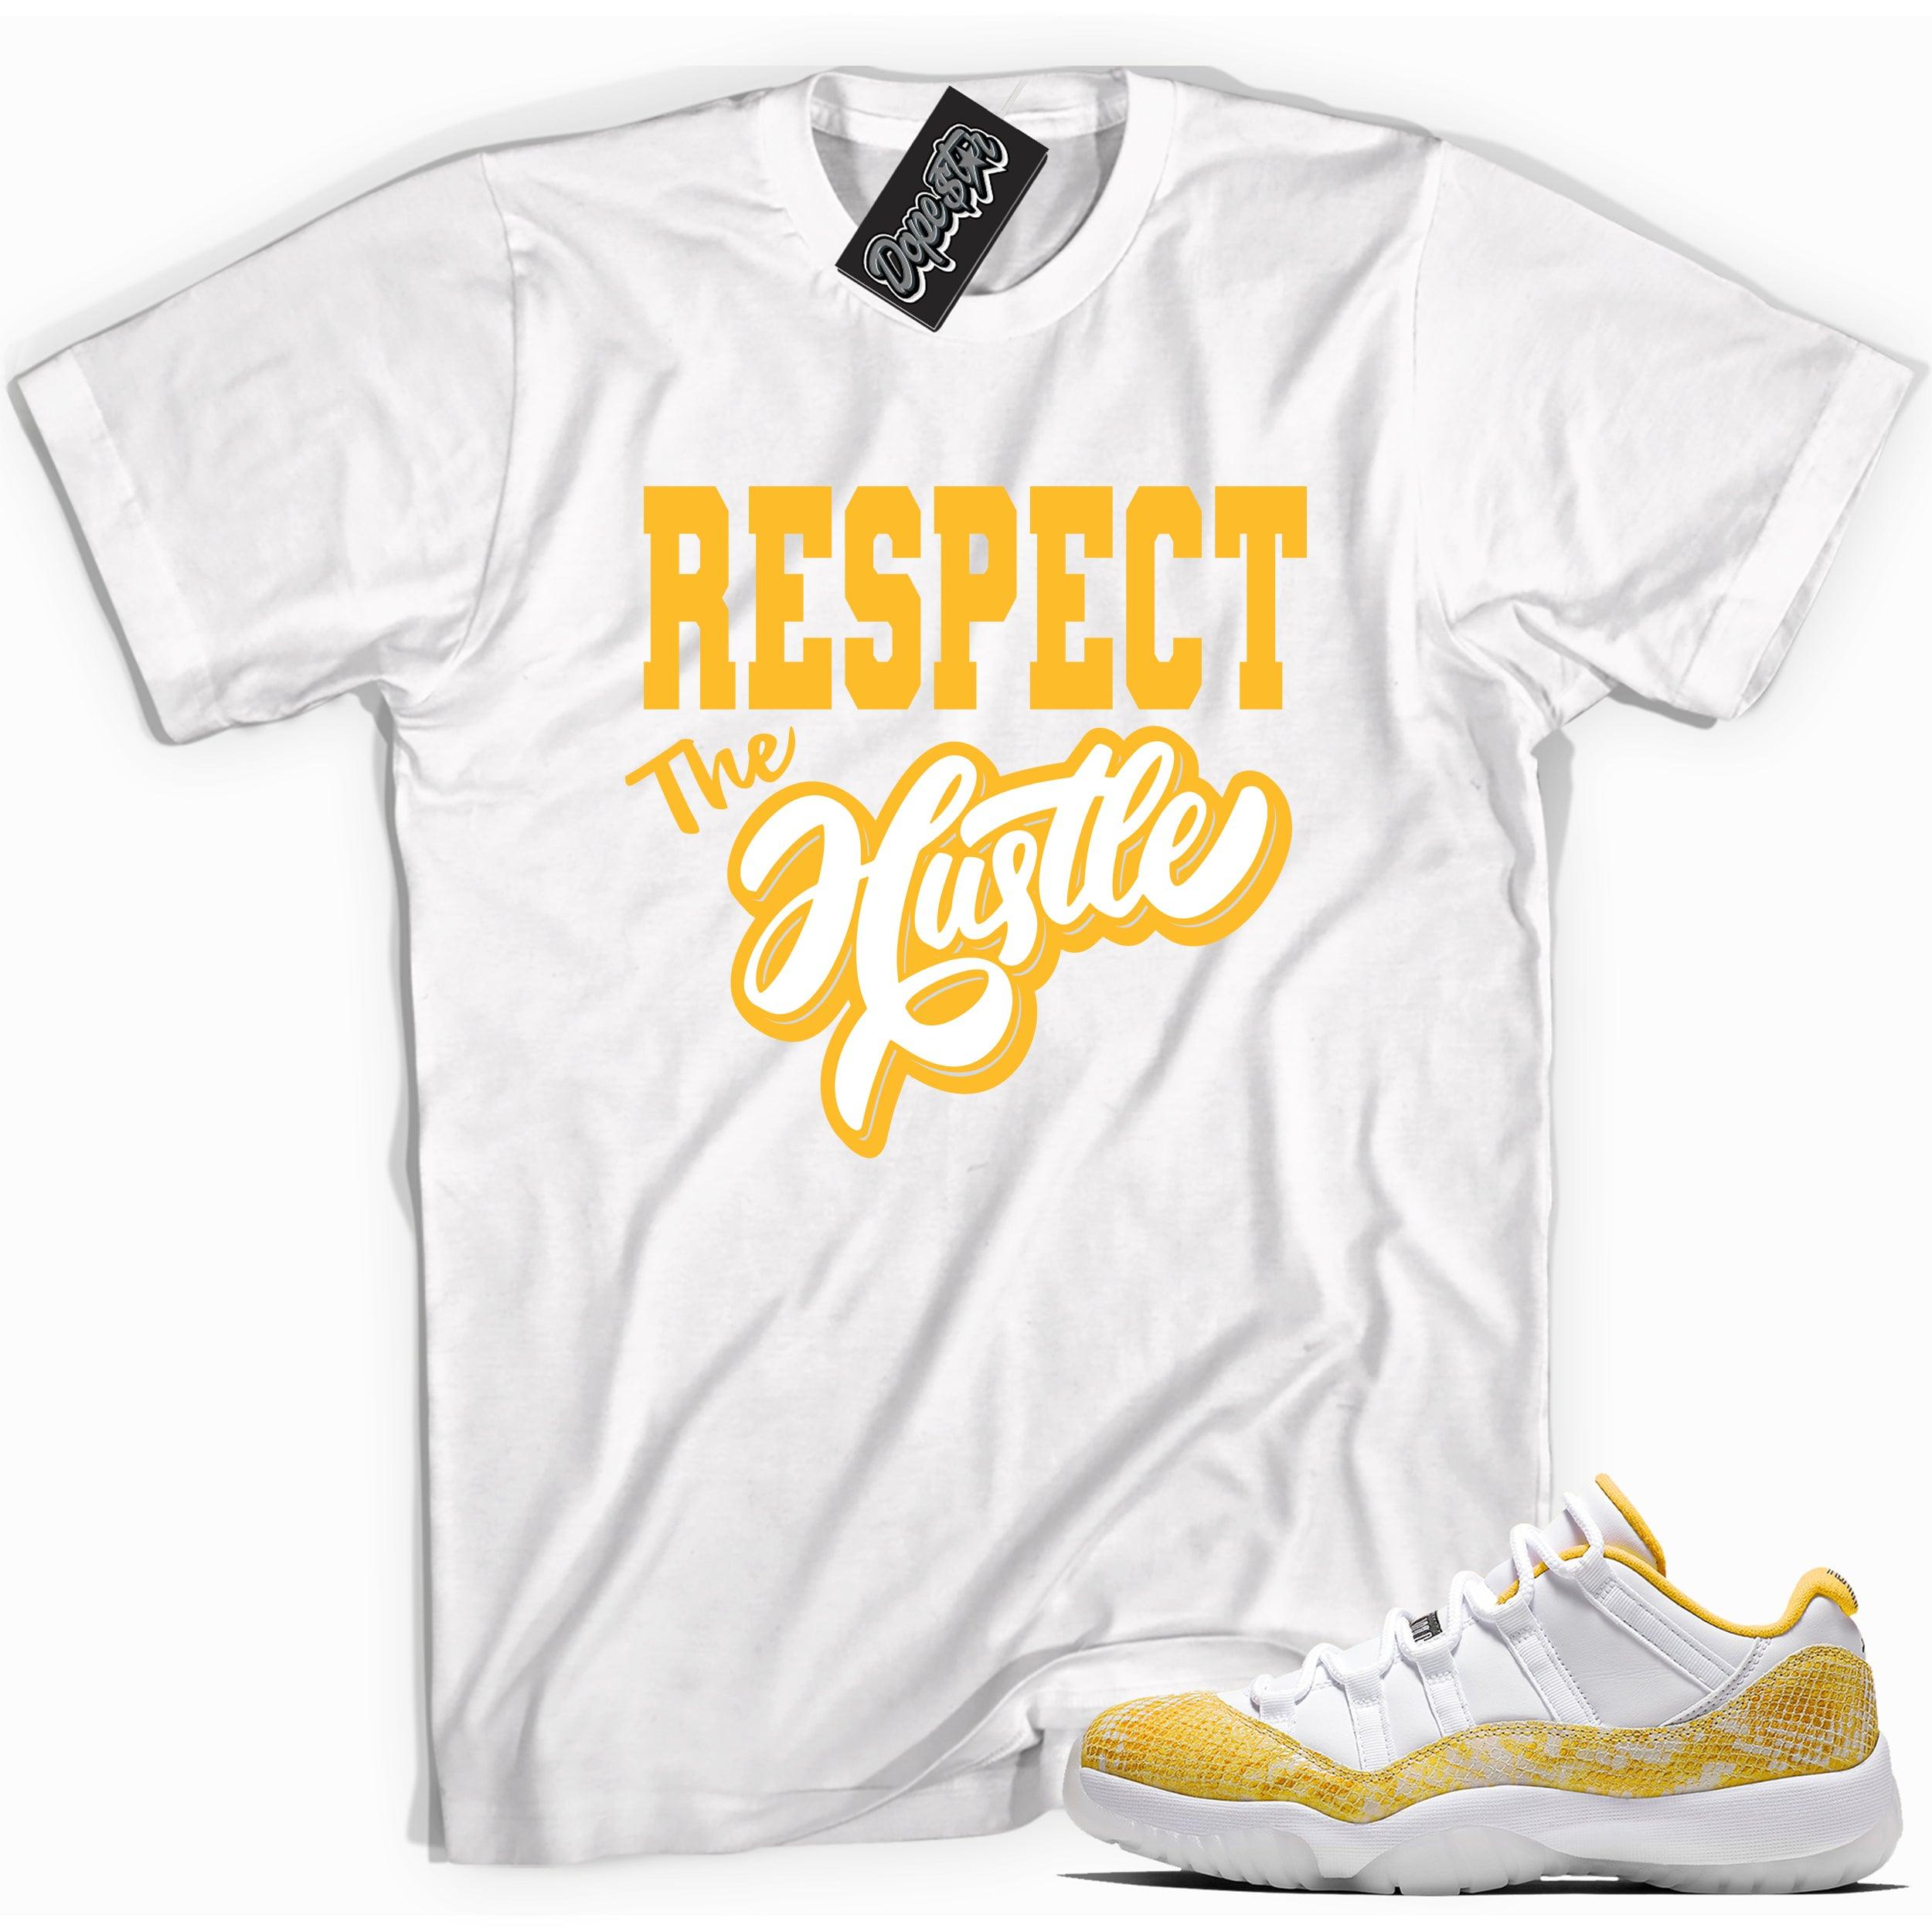 Cool white graphic tee with 'respect the hustle' print, that perfectly matches Air Jordan 11 Retro Low Yellow Snakeskin sneakers